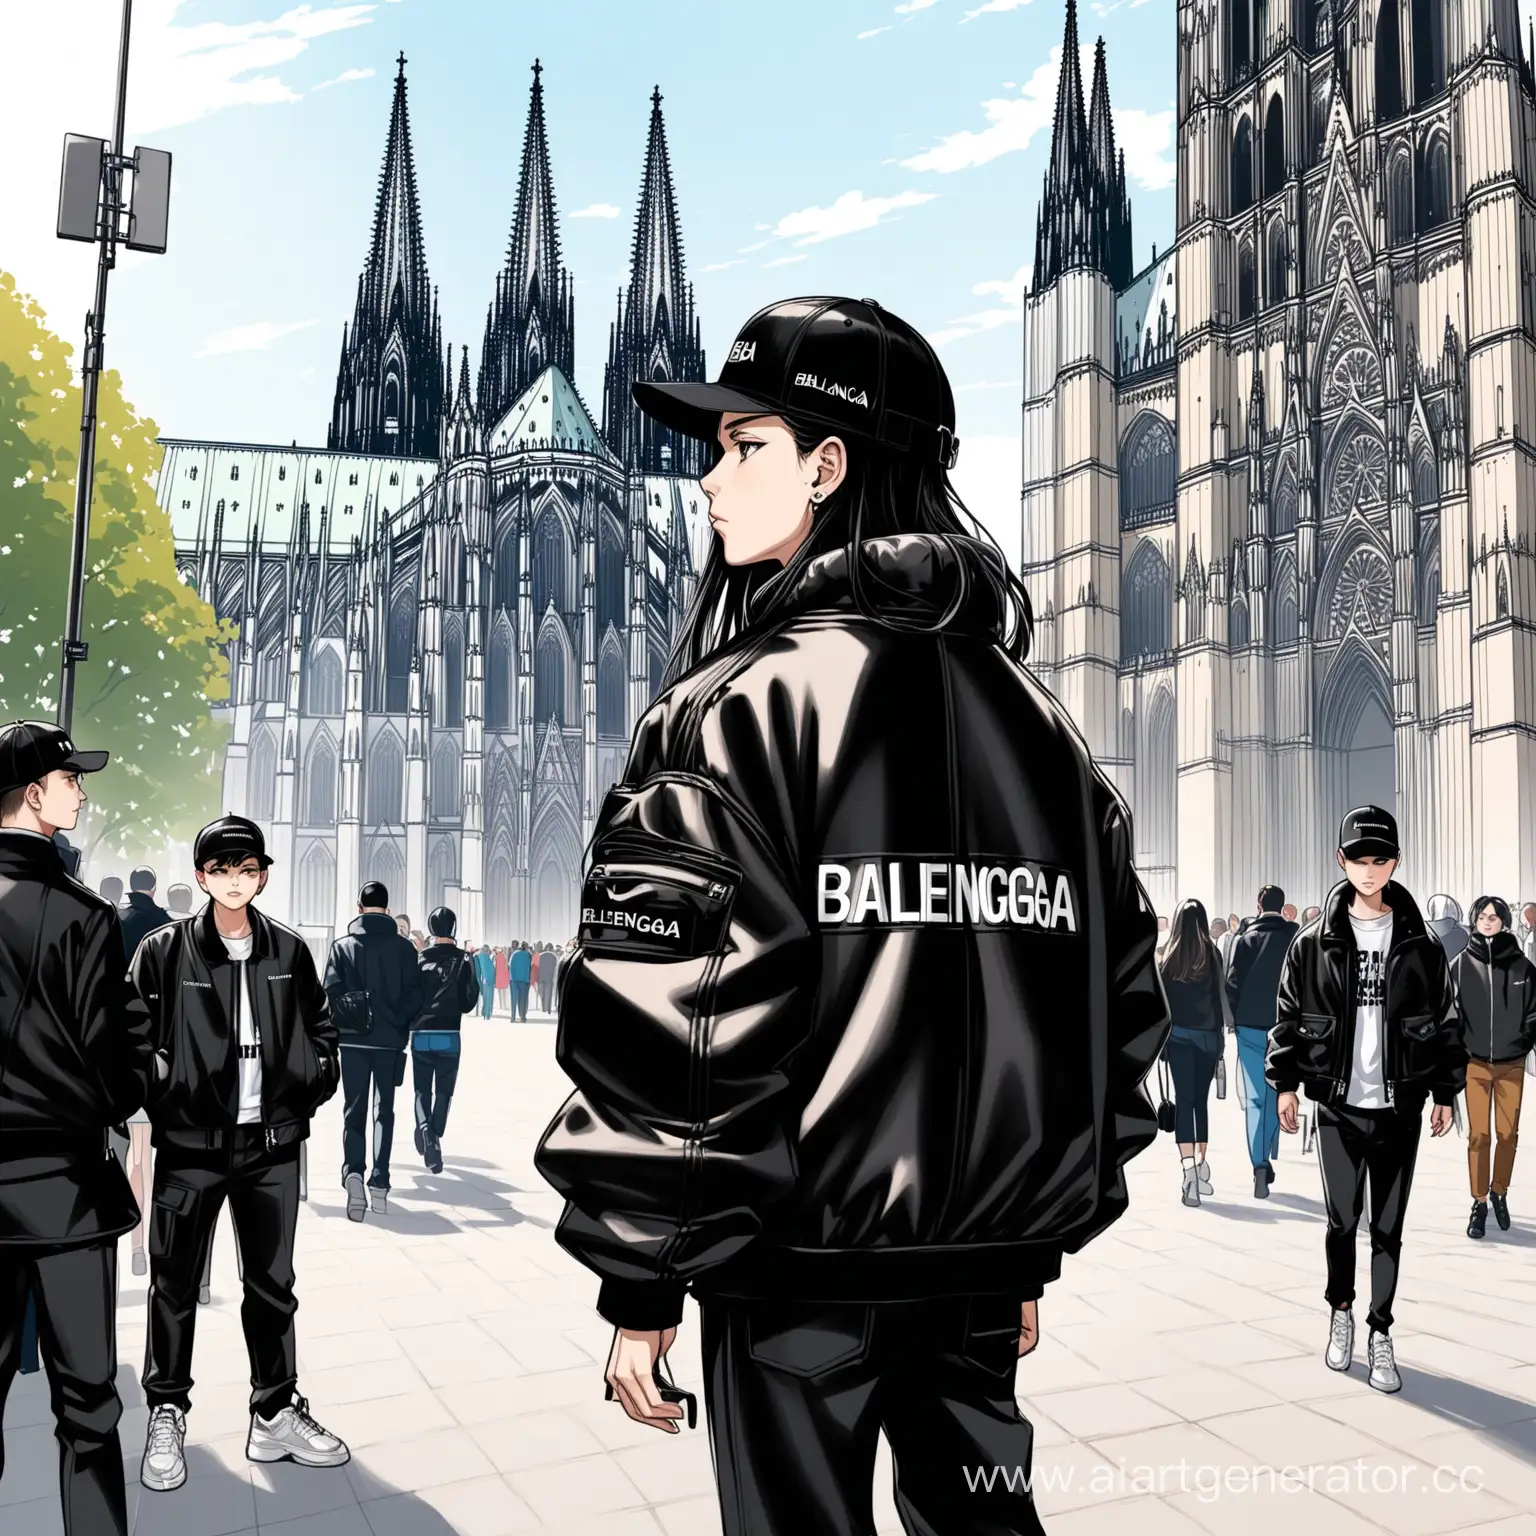 Stylish-Teenager-Posing-at-Cologne-Cathedral-in-Balenciaga-Outfit